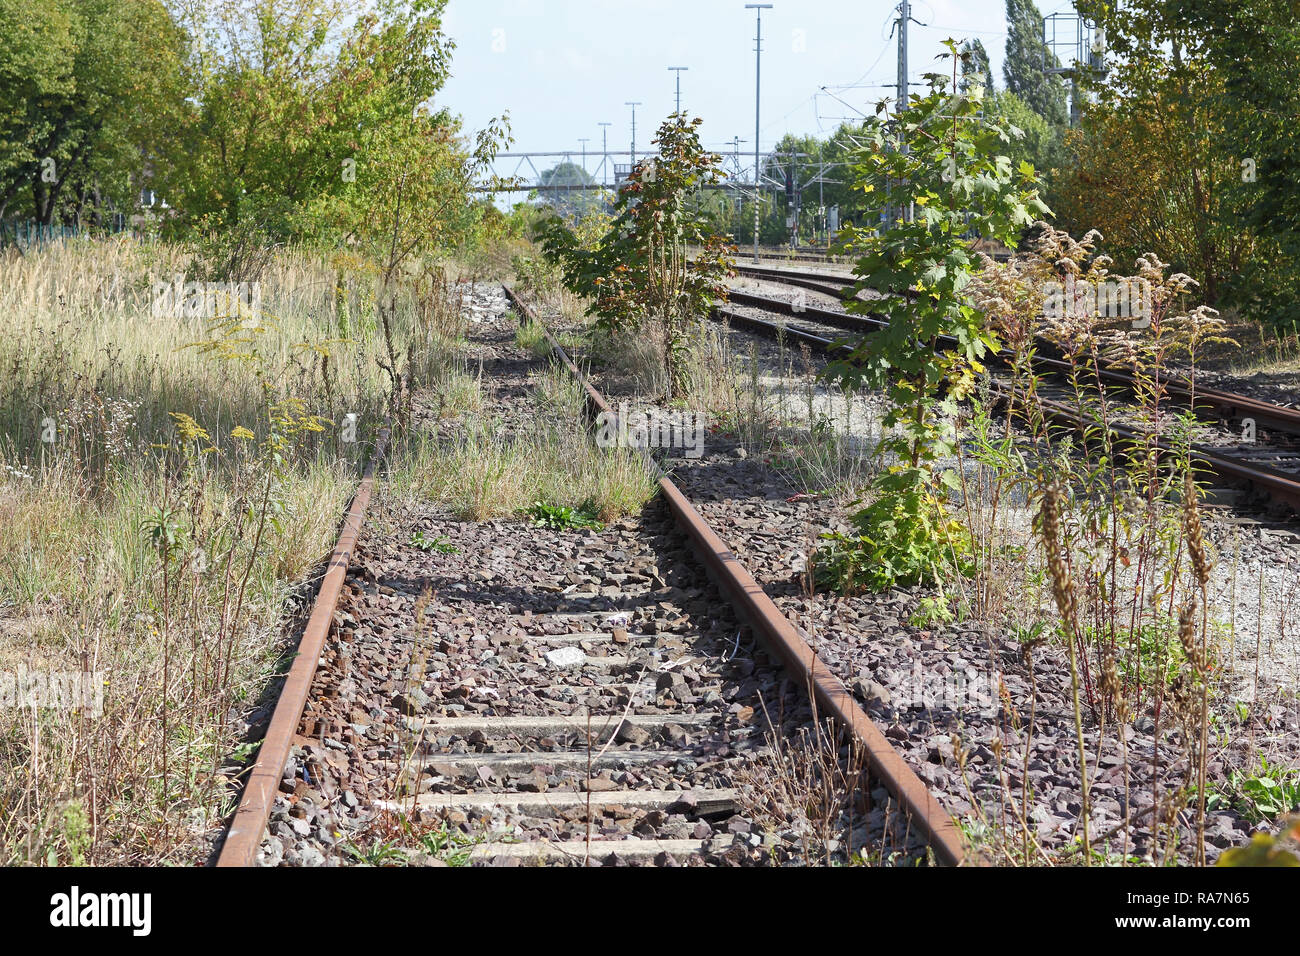 A decommissioned railway line beside tracks in operation Stock Photo